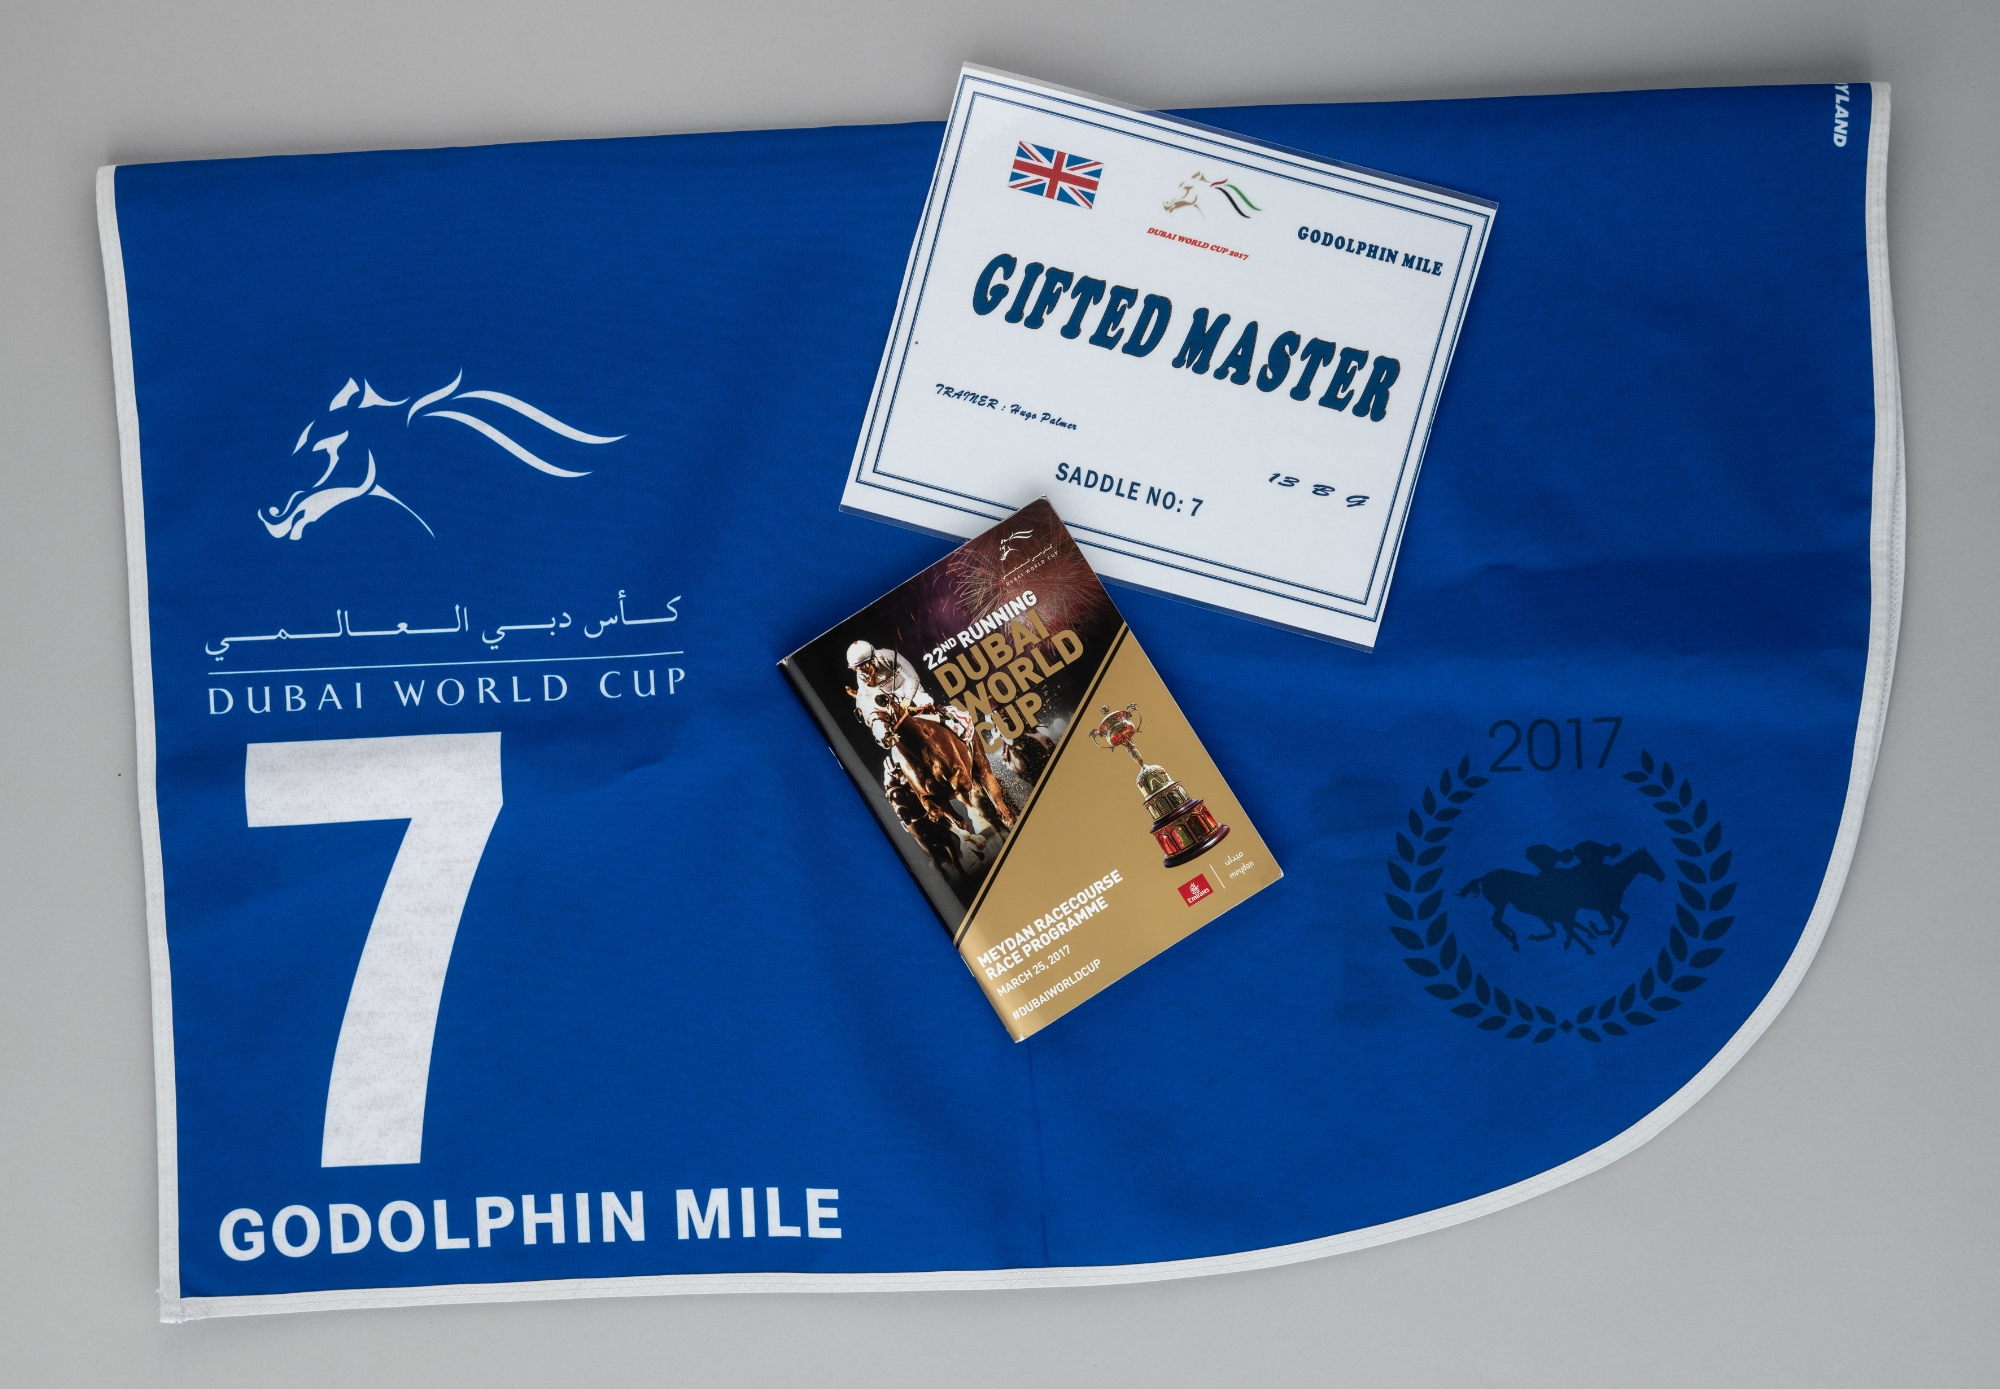 2017 Dubai World Cup meeting Godolphin Mile morning exercise number cloth for Hugo Palmer's runner